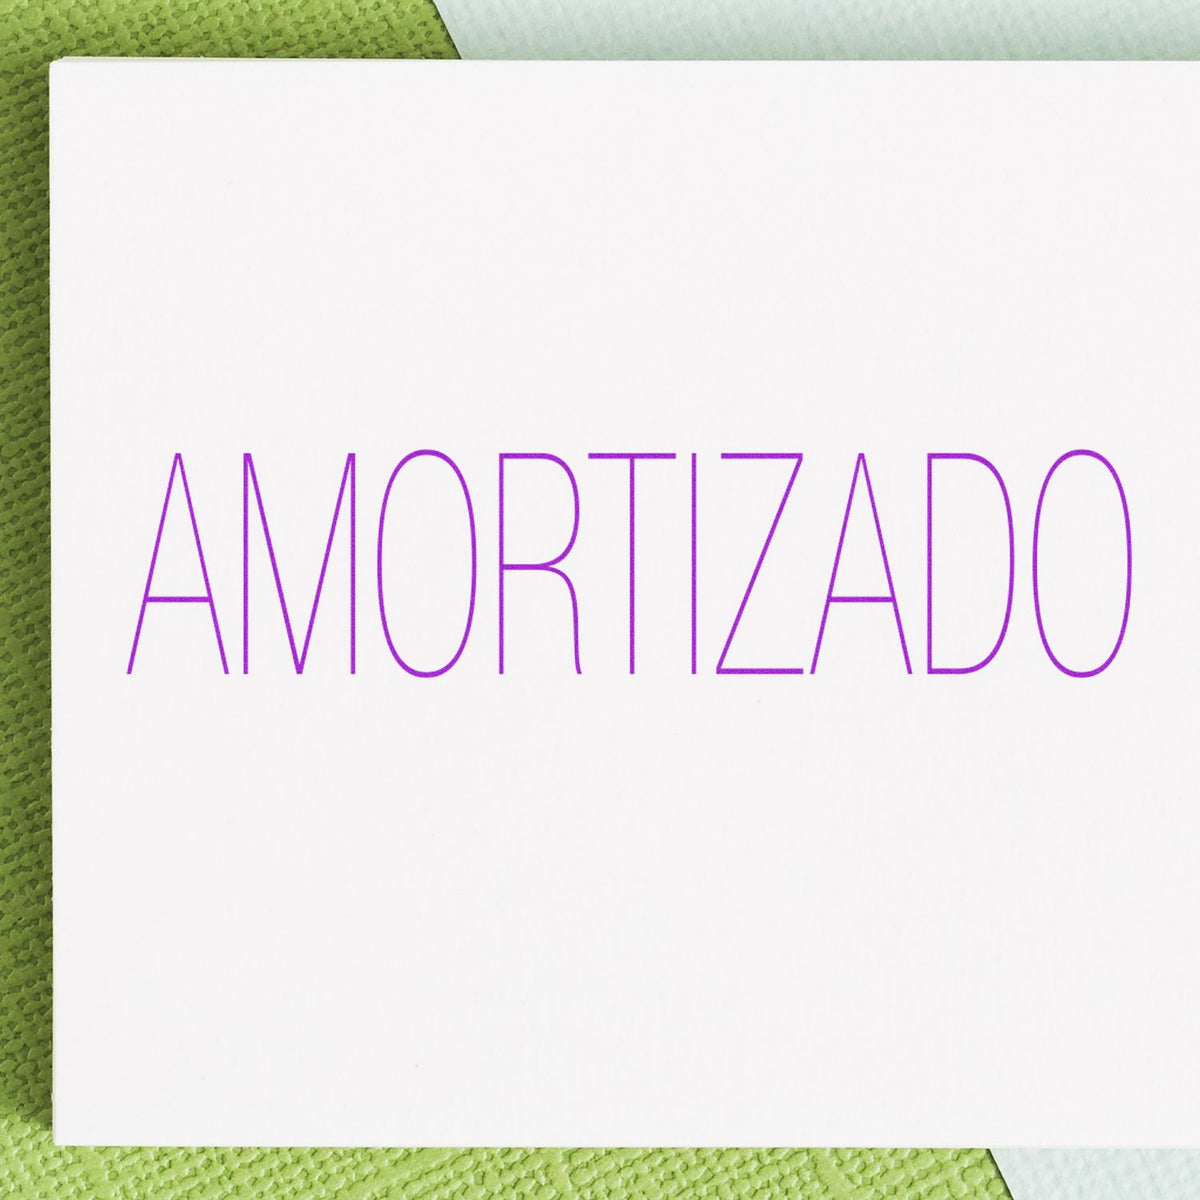 Large Amortizado Rubber Stamp In Use